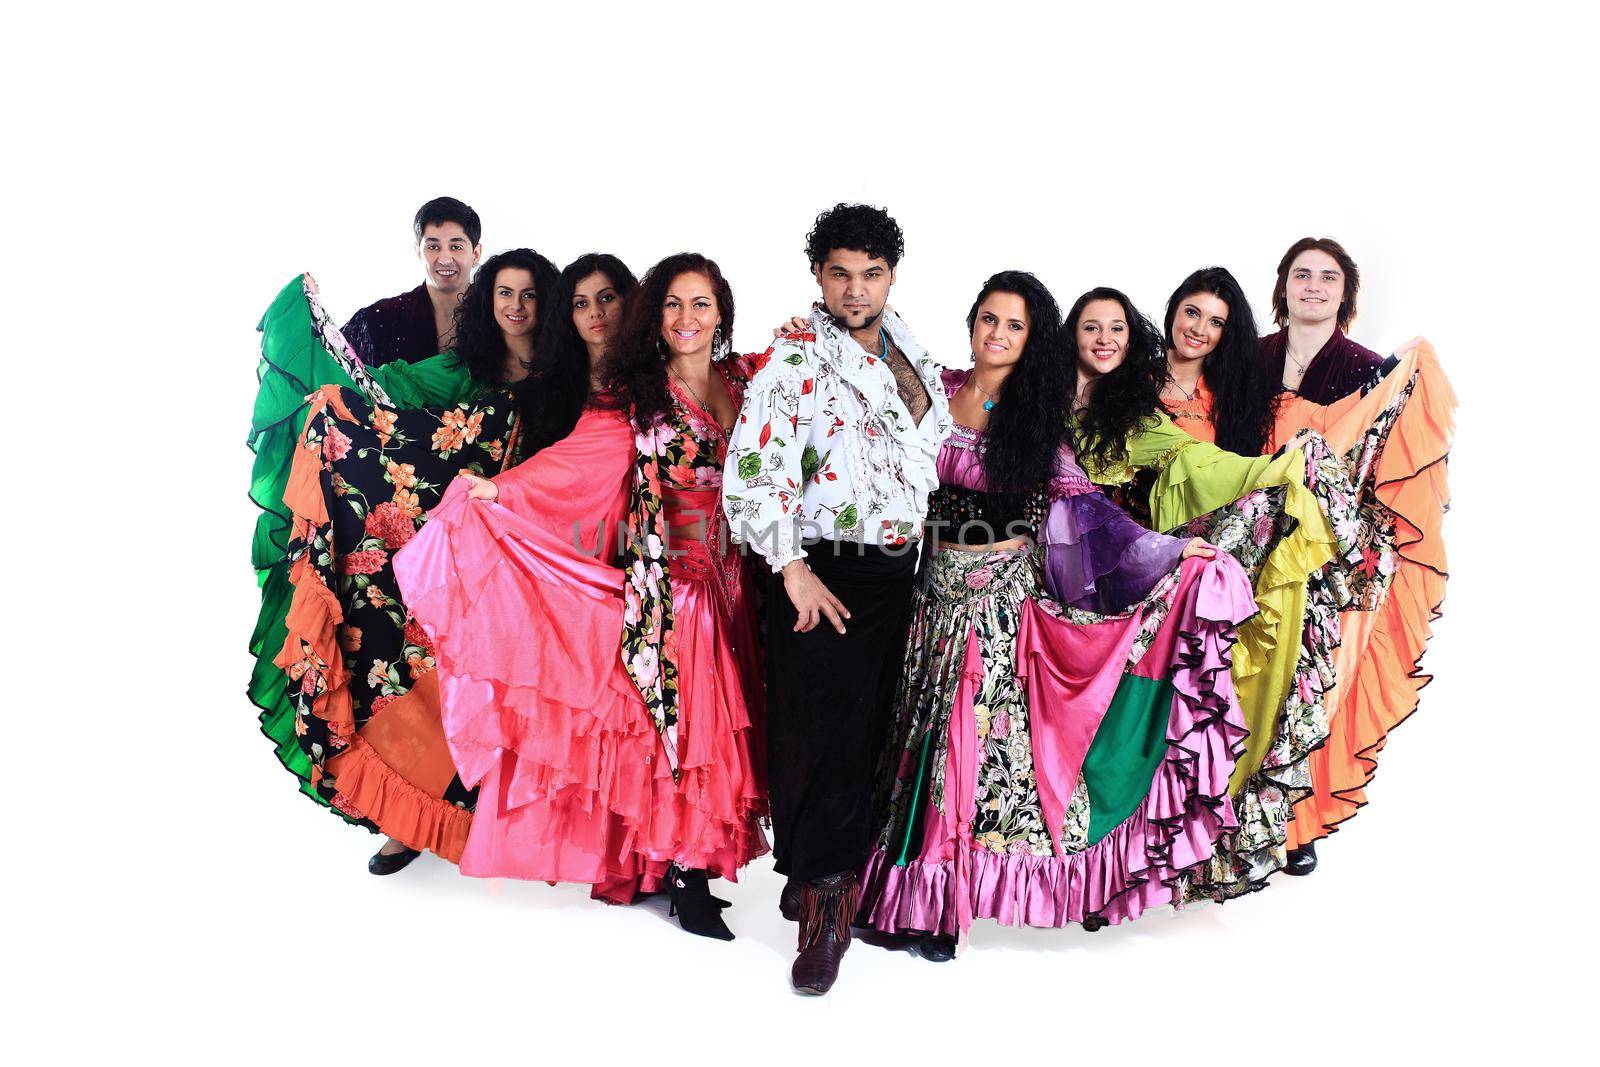 group portrait of a Gypsy dance group in national costumes by SmartPhotoLab